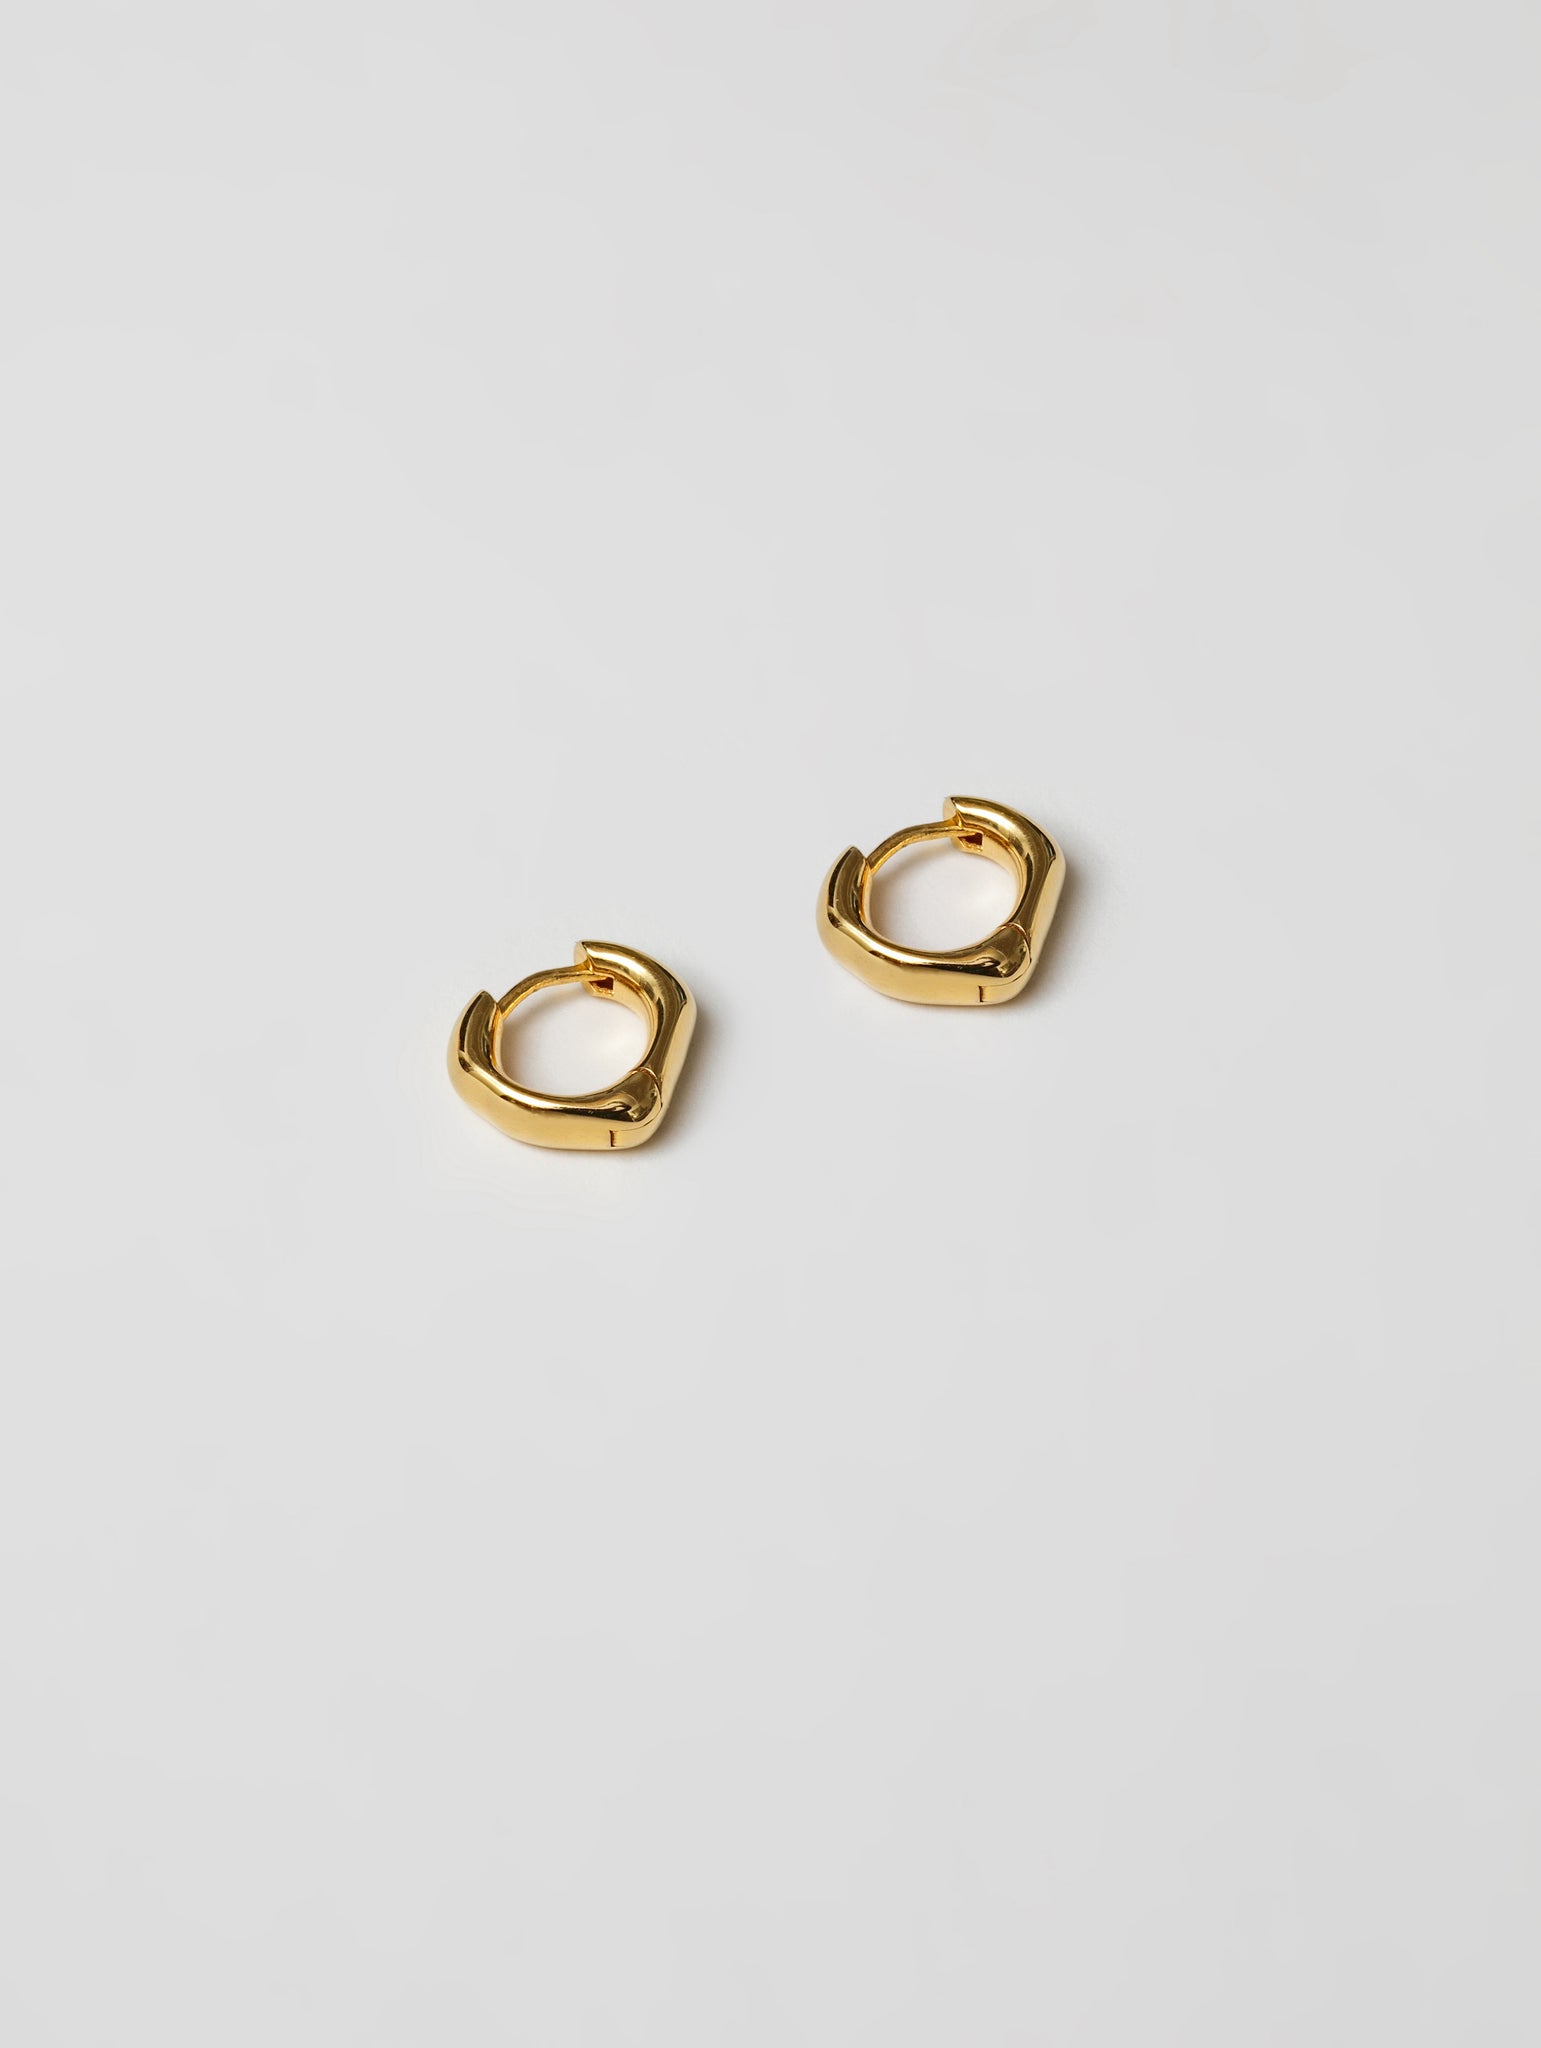 Wolf Circus Everyday Single Unisex Organic Clicker Hoop Earring 14k Gold Plated Brass | Kenzo Hoop in Gold-Earrings-wolfcircus.com